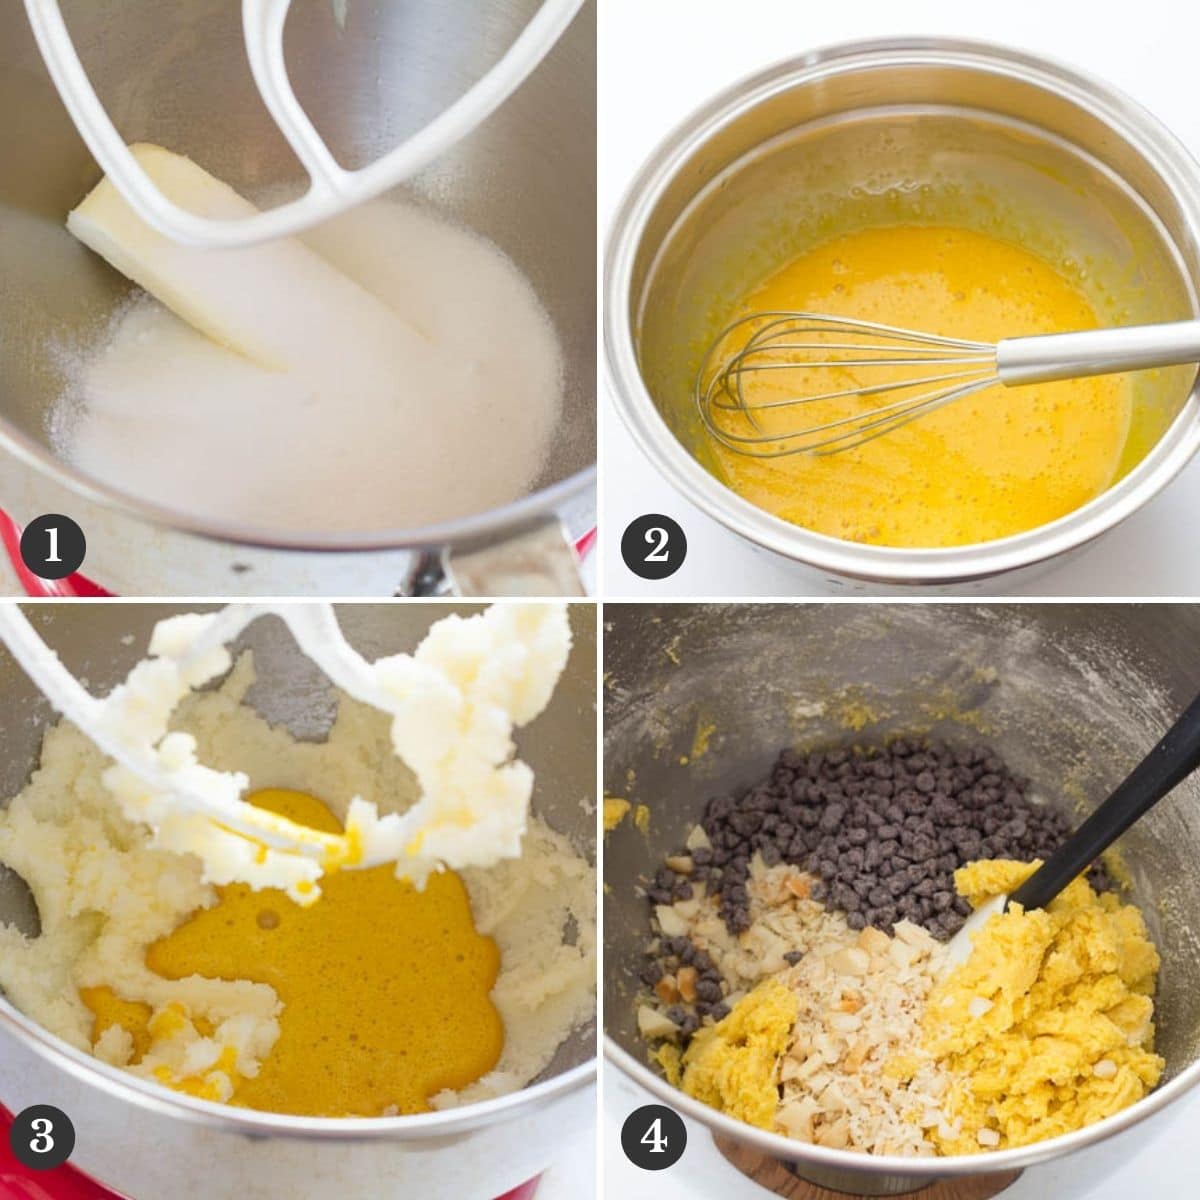 4 step by step images of making the cookie dough.